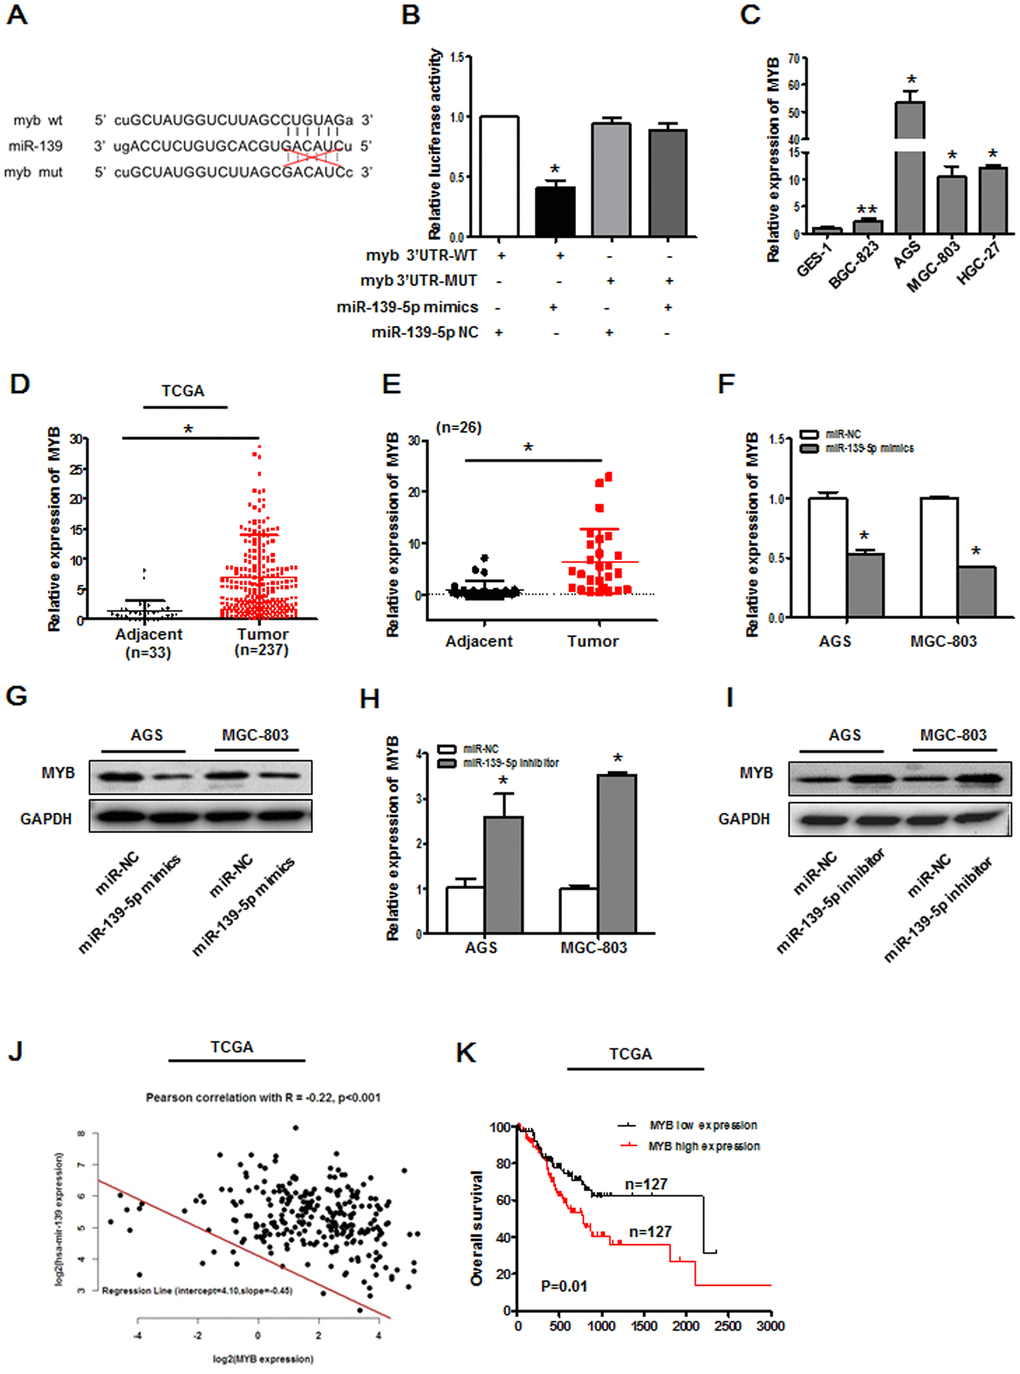 MYB is a miR-139-5p target gene. (A) Putative MYB and miR-139-5p sequence complementarity as predicted using StarBase. (B) Binding interactions between miR-139-5p and MYB were assessed via luciferase reporter assays in 293T cells cotransfected with MYB WT or MYB MUT constructs and miRNA NC or miR-139-5p mimics. *PC) MYB expression was assessed via qPCR in GES-1, BGC-823, AGS, MGC-803, and HGC-27 cells. *PPD) MYB expression levels in gastric cancer tissues in the TCGA database, *PE) MYB expression levels were assessed via qPCR in 26 pairs of gastric cancer tumors and paracancerous tissues, *PF) MYB mRNA levels were assessed in AGS and MGC-803 cells following miR-139-5p mimic transfection. *PG) MYB protein levels were assessed in AGS and MGC-803 cells following miR-139-5p mimic transfection. (H) MYB mRNA levels in AGS and MGC-803 cells were assessed following miR-139-5p inhibitor transfection. *PI) MYB protein levels were assessed in AGS and MGC-803 cells following miR-139-5p inhibitor transfection. (J) Pearson correlation analyses were used to evaluate the relationship between miR-139-5p and MYB expression in the TCGA database, R=-0.22, PK) Overall gastric cancer patient survival in the TCGA database was compared as a function of MYB expression (low vs. high; log-rank, P=0.01).